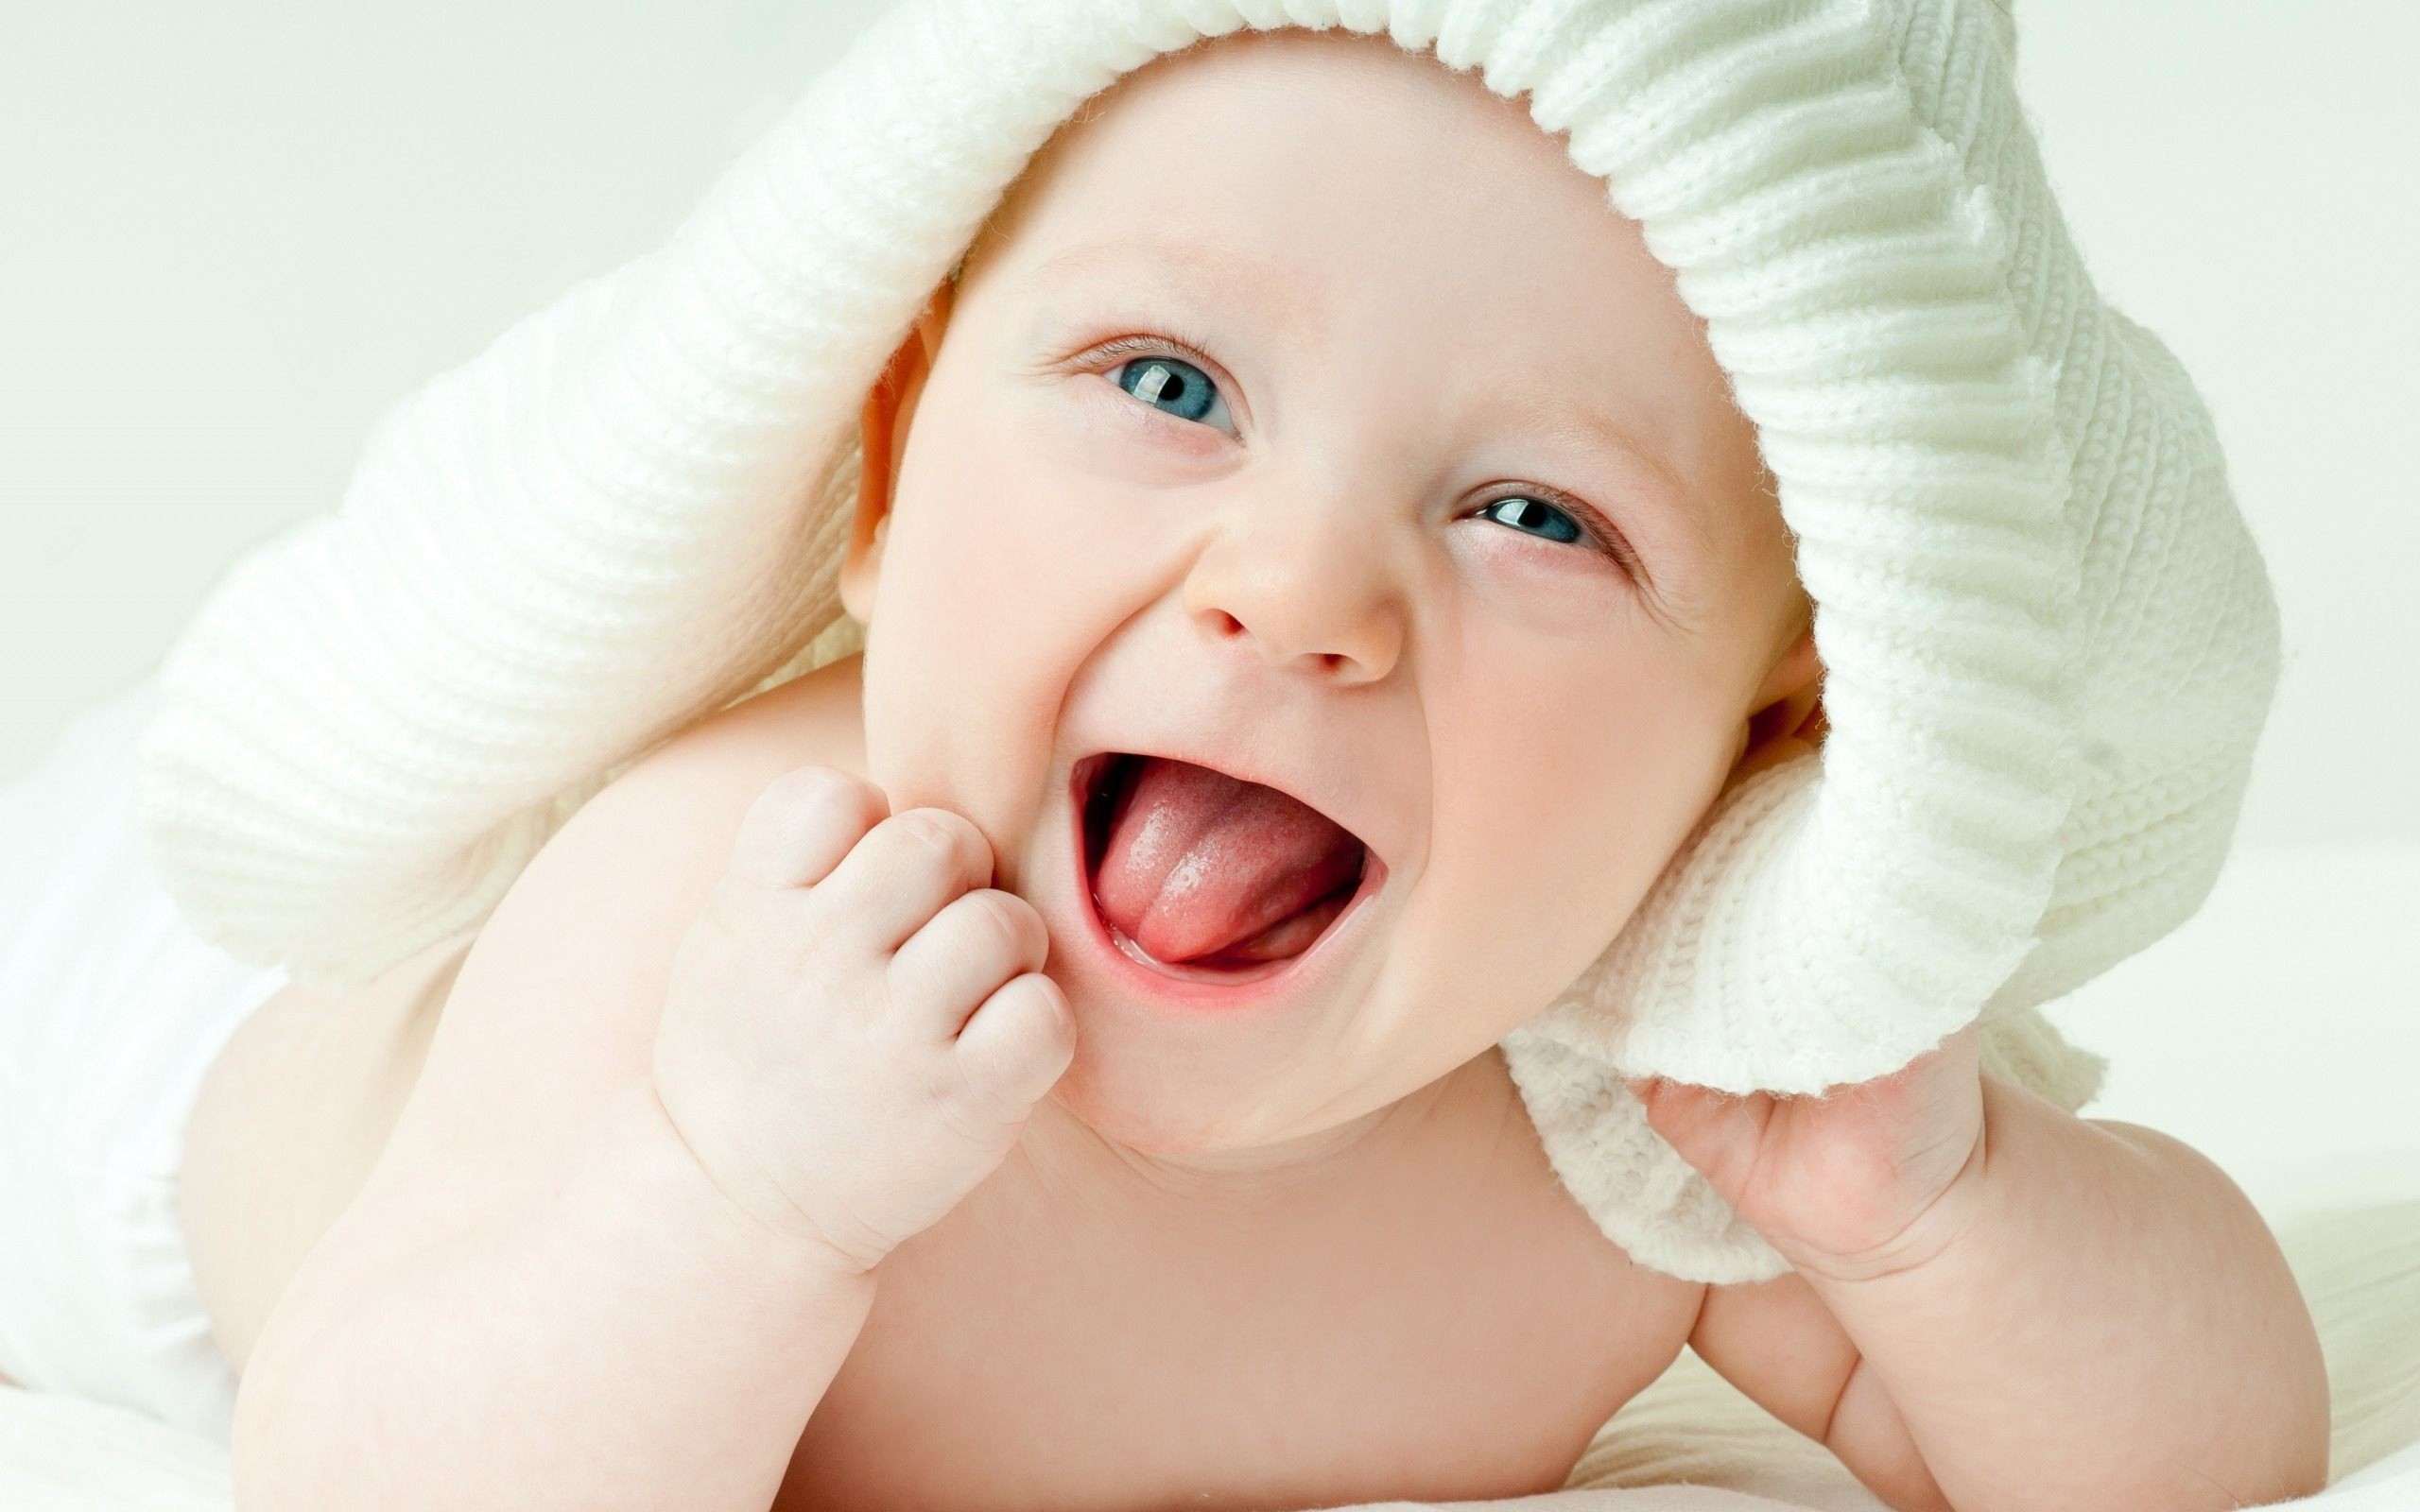 2560x1600 Baby Laugh Cute Wallpaper HD Download Of Laughing Baby